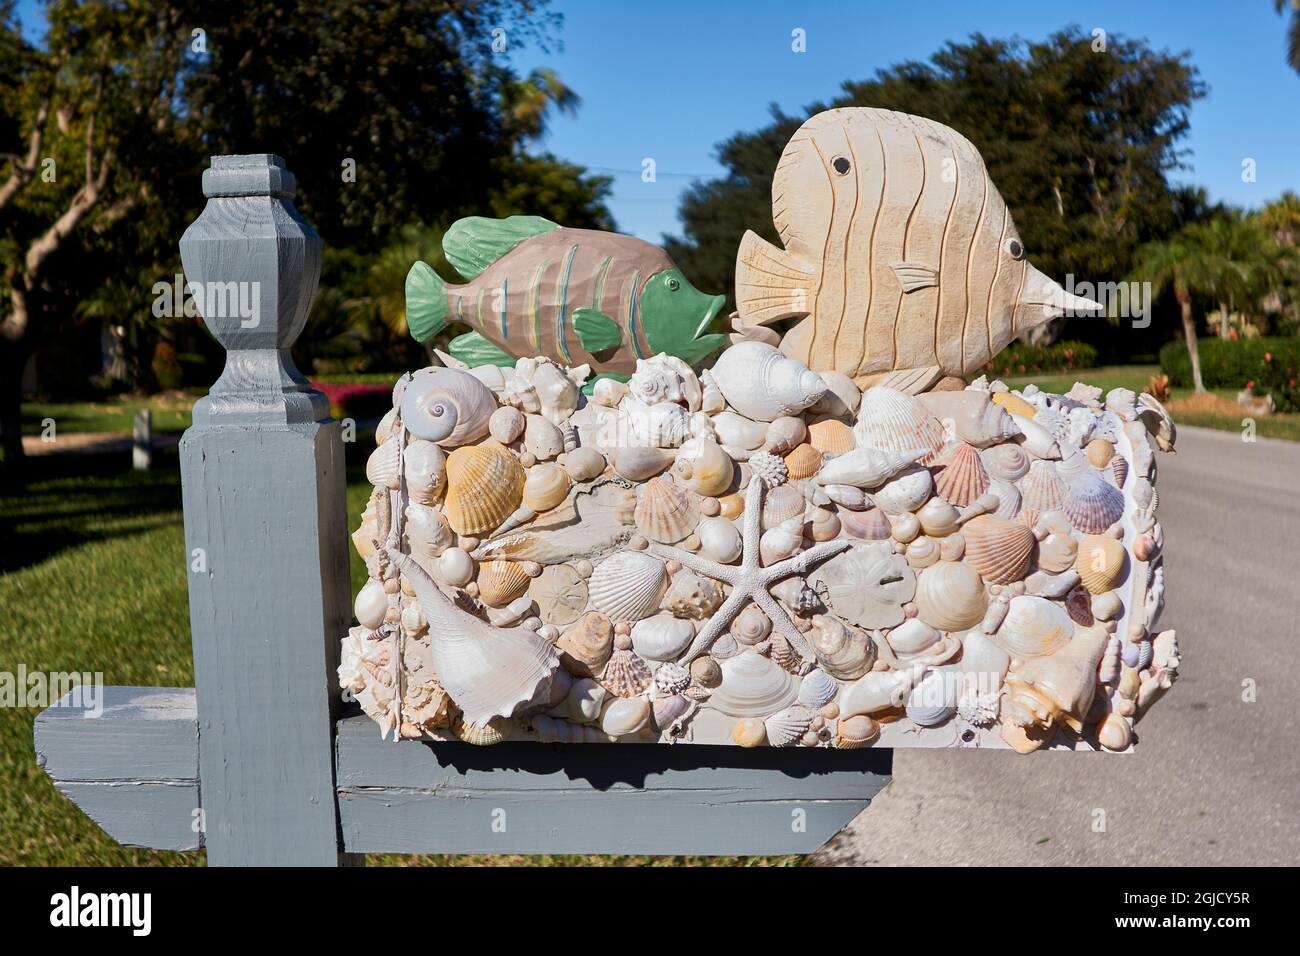 USA, Florida, Sanibel Island. Sanibel shell mailbox. Sanibel is a barrier island known for beach shelling and the Ding Darling National Wildlife Refug Stock Photo